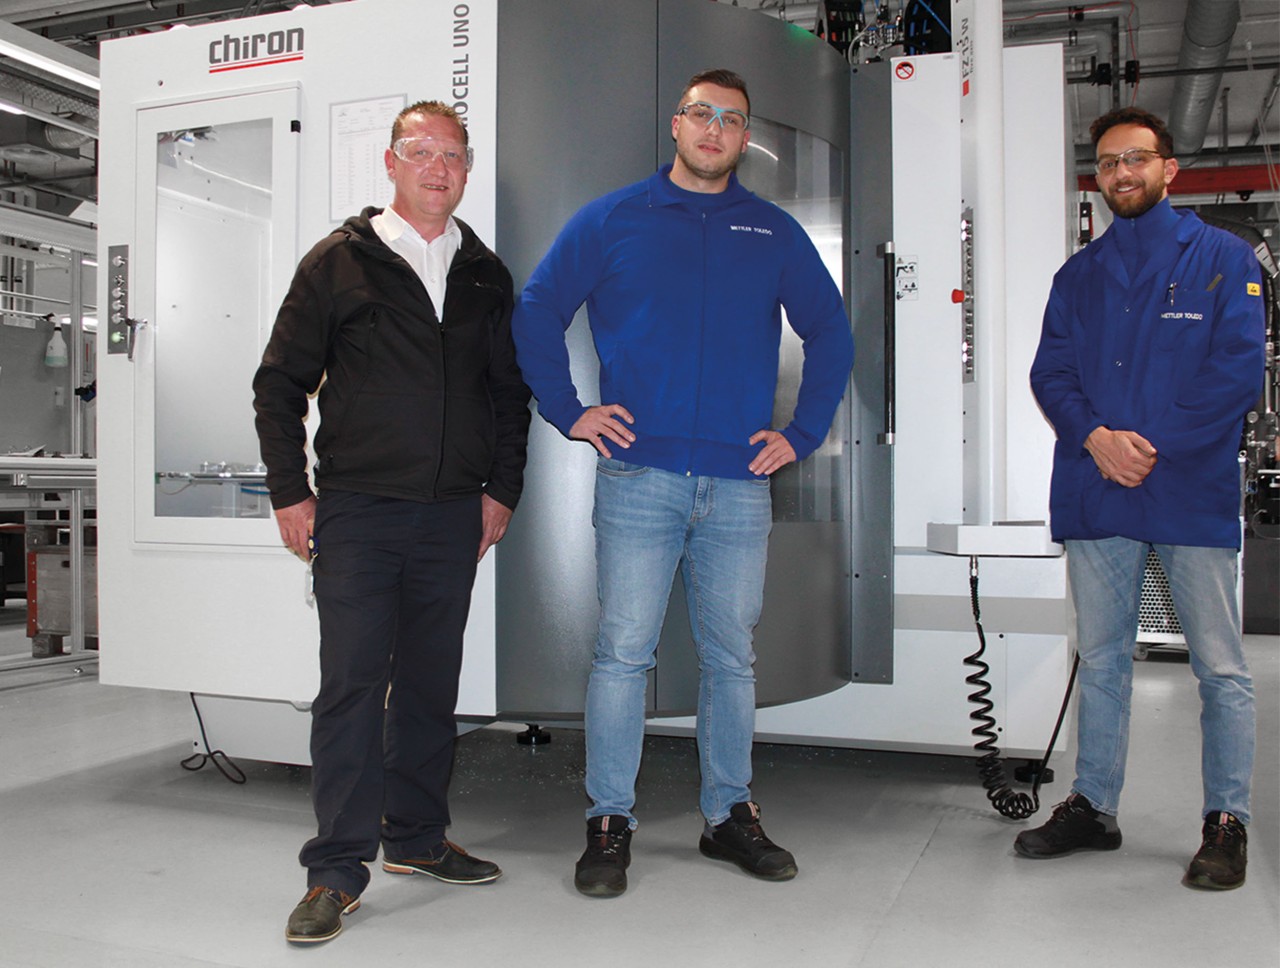  From left to right: Simon Heim (Technical Consulting / Sales, CHIRON Group), Remo Cadonau (BSc Mechanical Engineering and Head of Mechanical Manufacturing) and Dardan Muslija (CNC Specialist Manufacturing Technology & Maintenance, both from Mettler-Toledo).   Photo: Publica-Press Heiden AG 